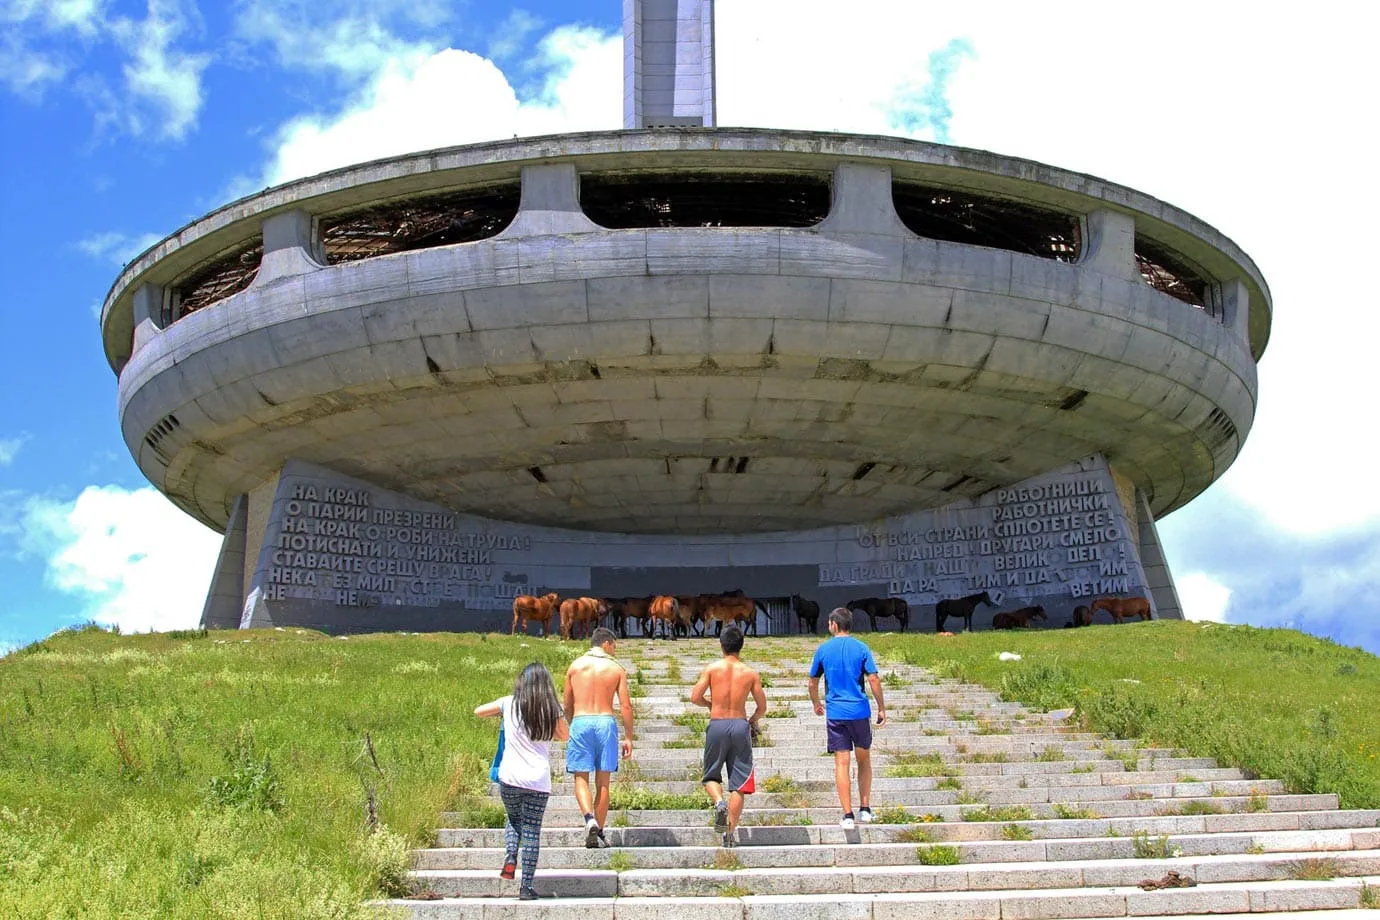 Messages written in giant Cyrillic letters on either side of the main entrance greet you as you walk up the stairs to Buzludzha